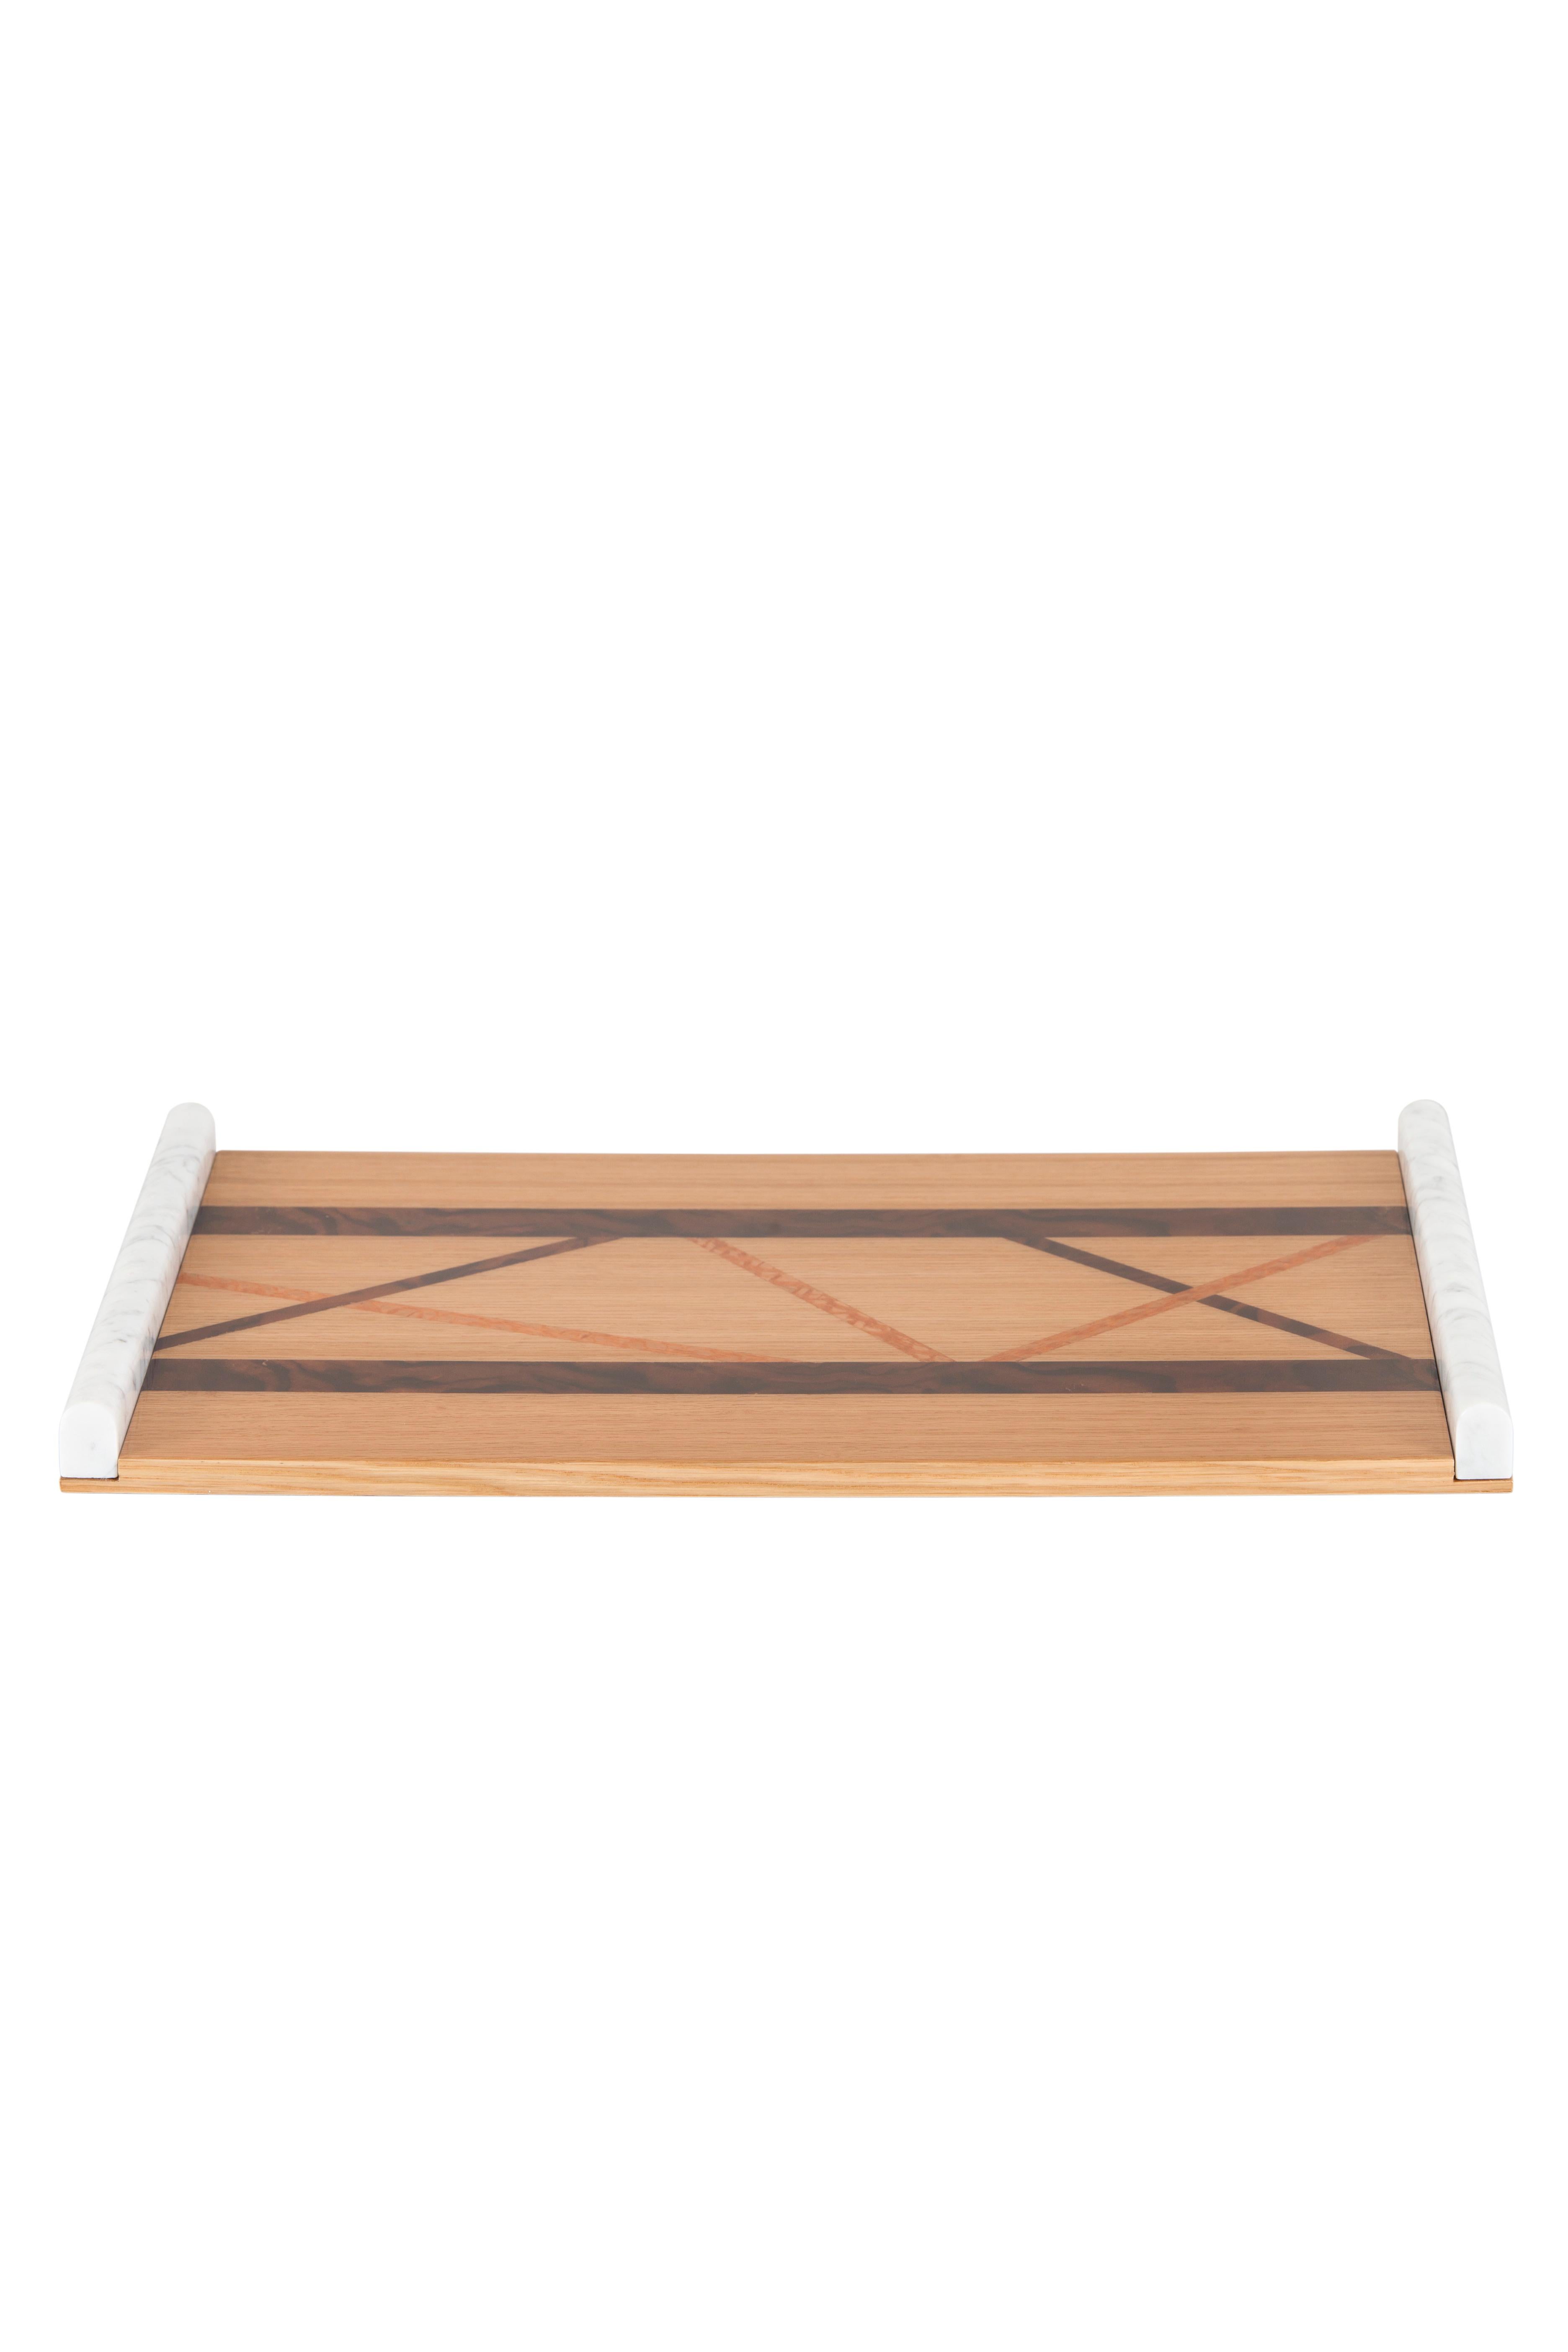 Guadiana serving tray, Lusitanus Home Collection, Handcrafted in Portugal - Europe by Lusitanus Home.

Guadiana is a sublime serving tray, designed to uplift layback moments. Handcrafted with precision and care, the wooden matches seamlessly with